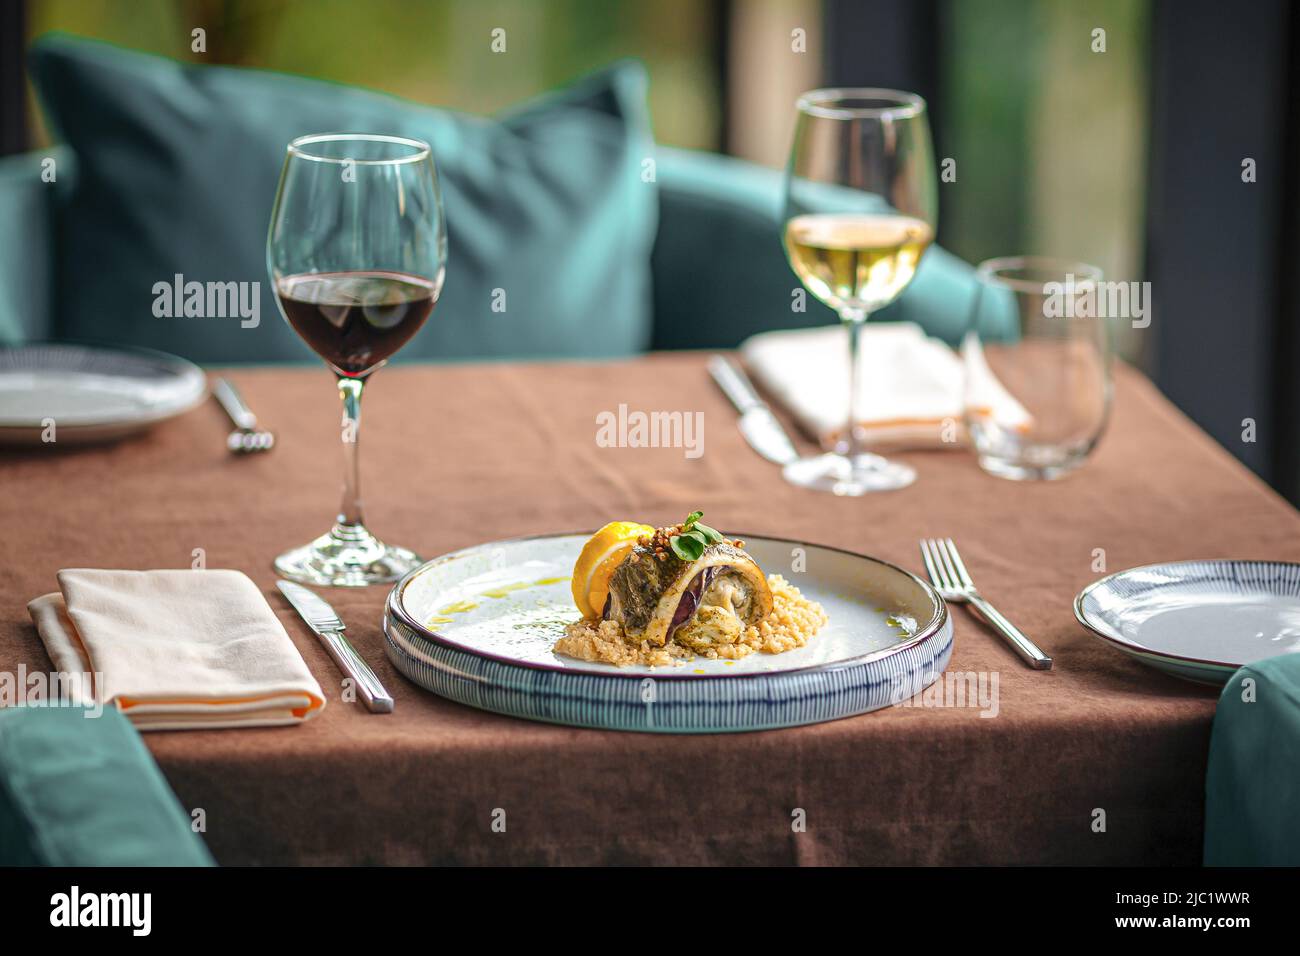 Served restaurant table with drinks and food Stock Photo